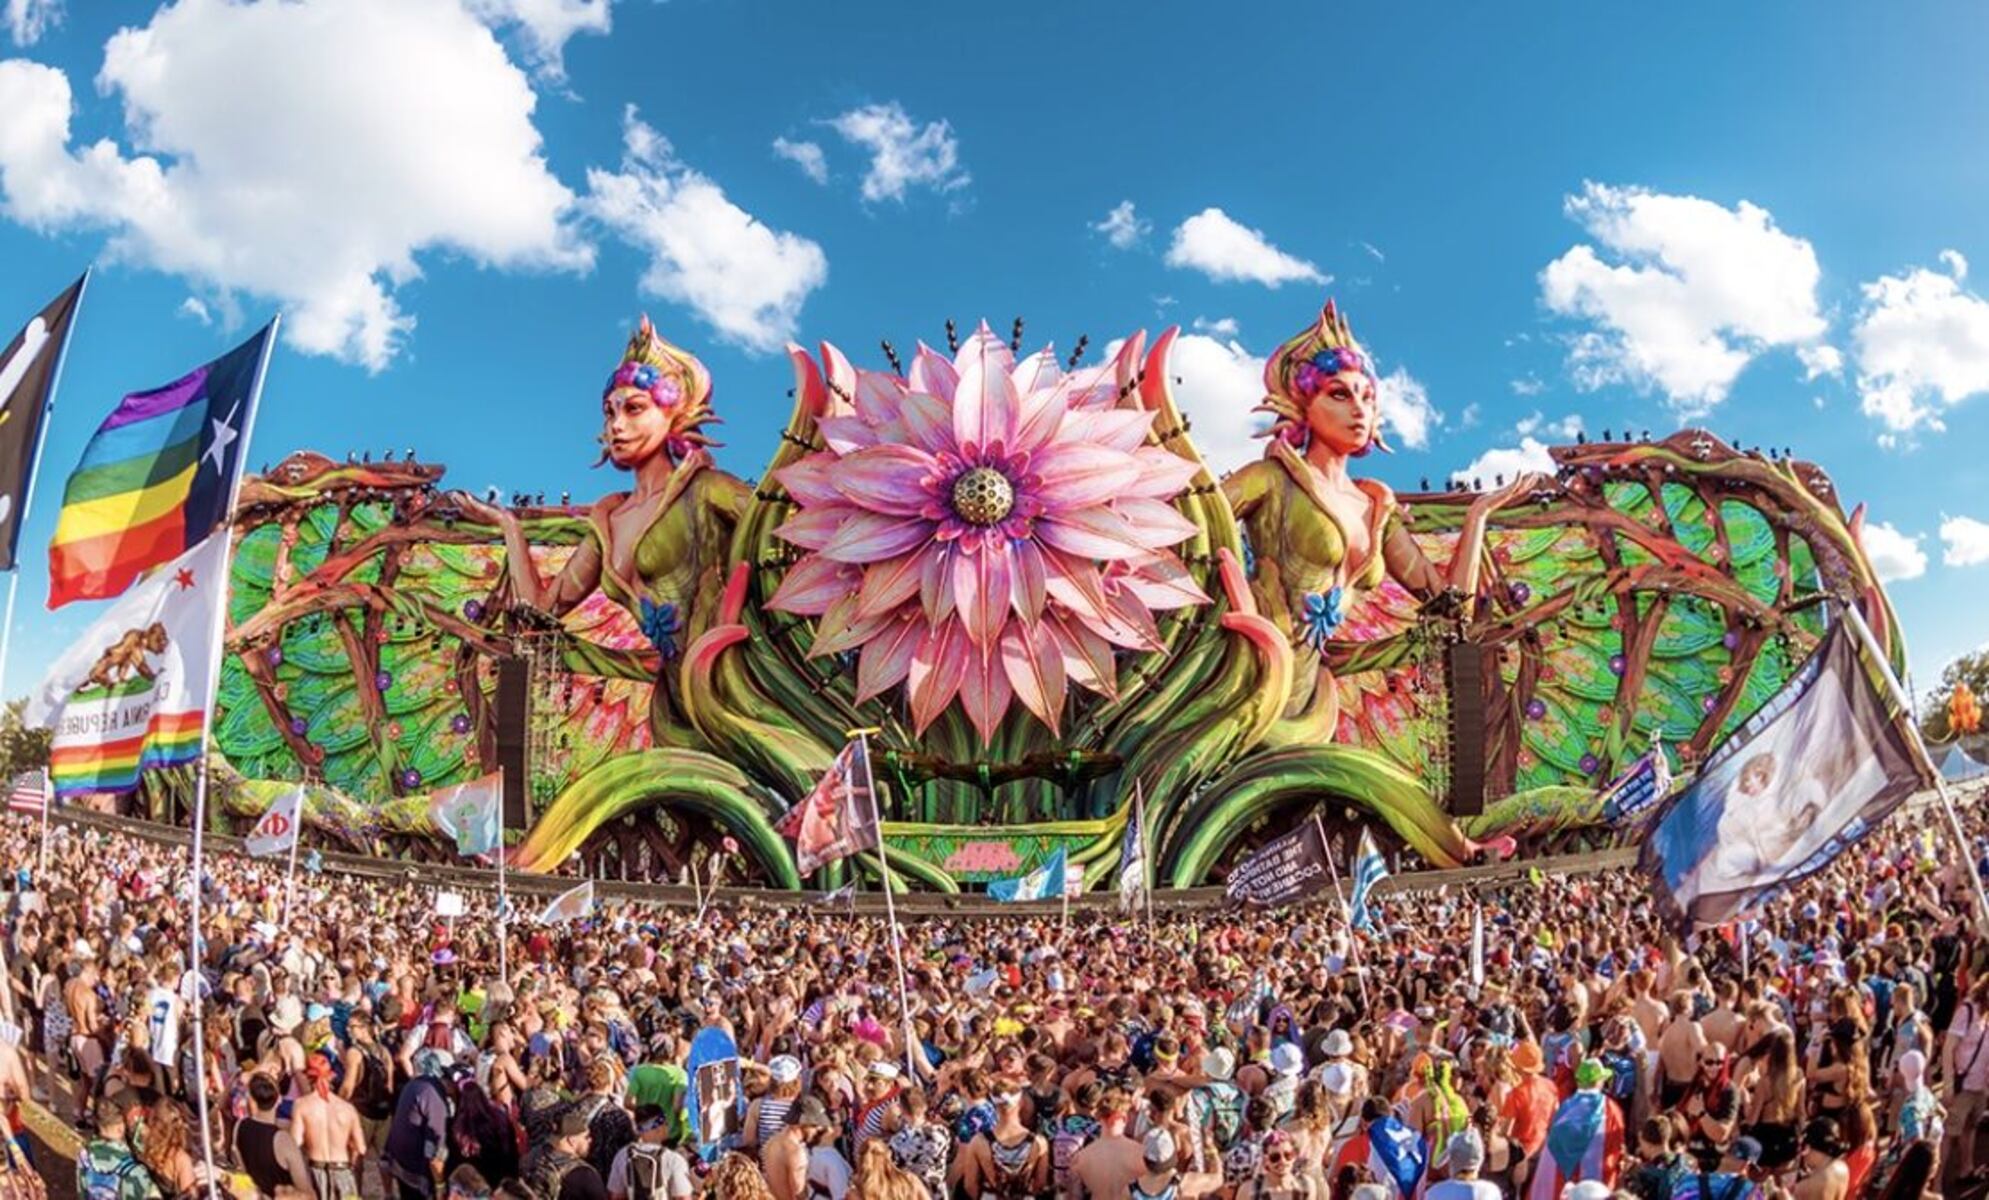 18 Facts About Electric Daisy Carnival (EDC)